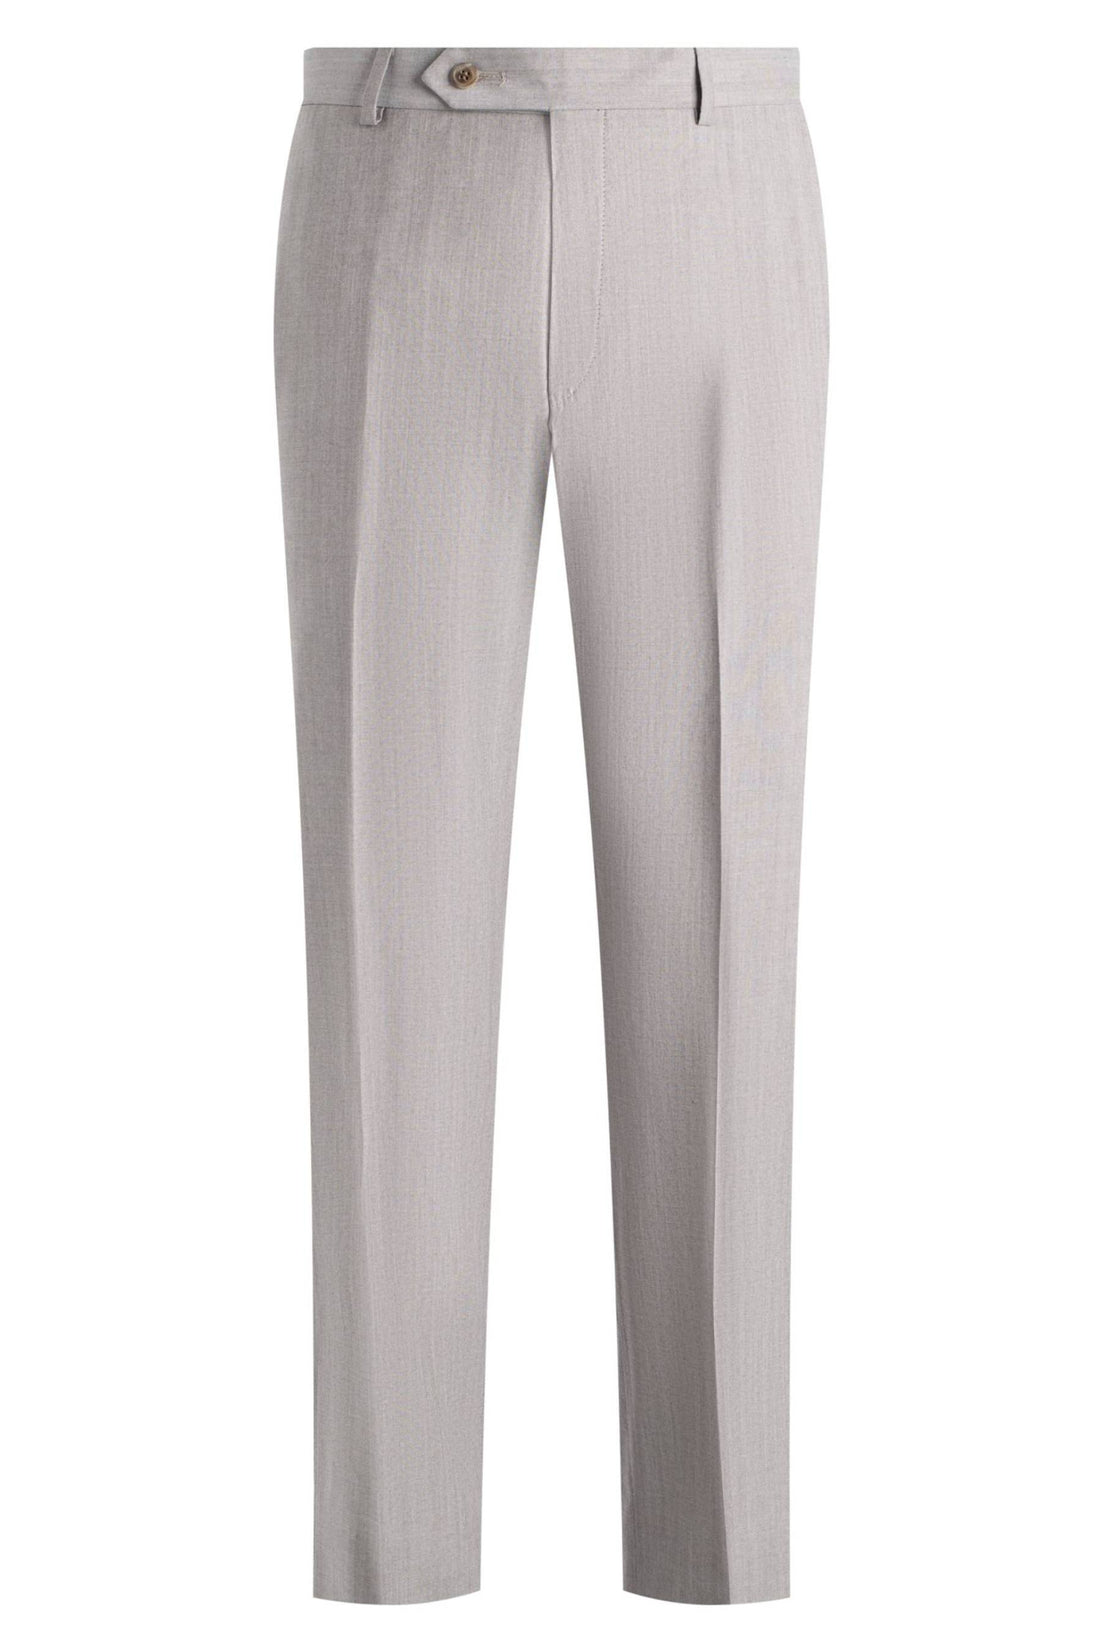 Samuelsohn Light Taupe Stretch Pindot Trousers front